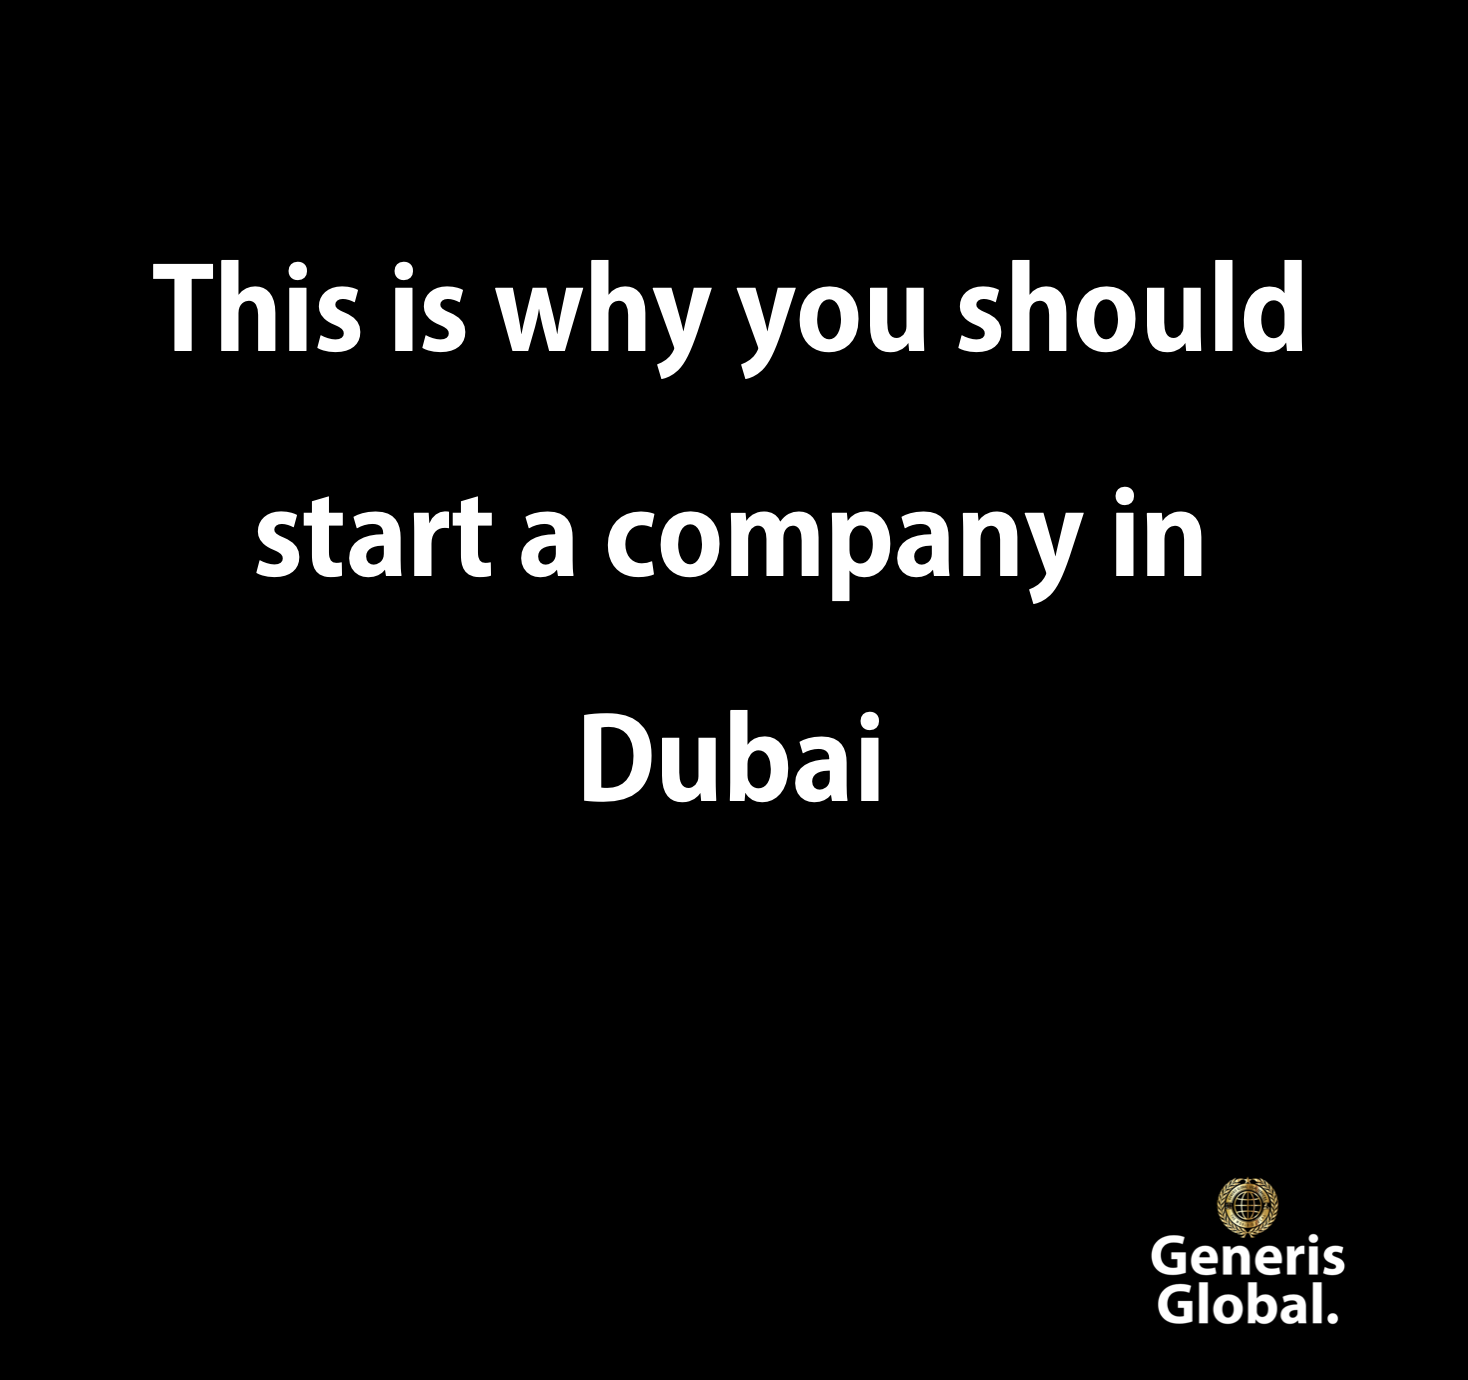 This is why you should start a company in Dubai